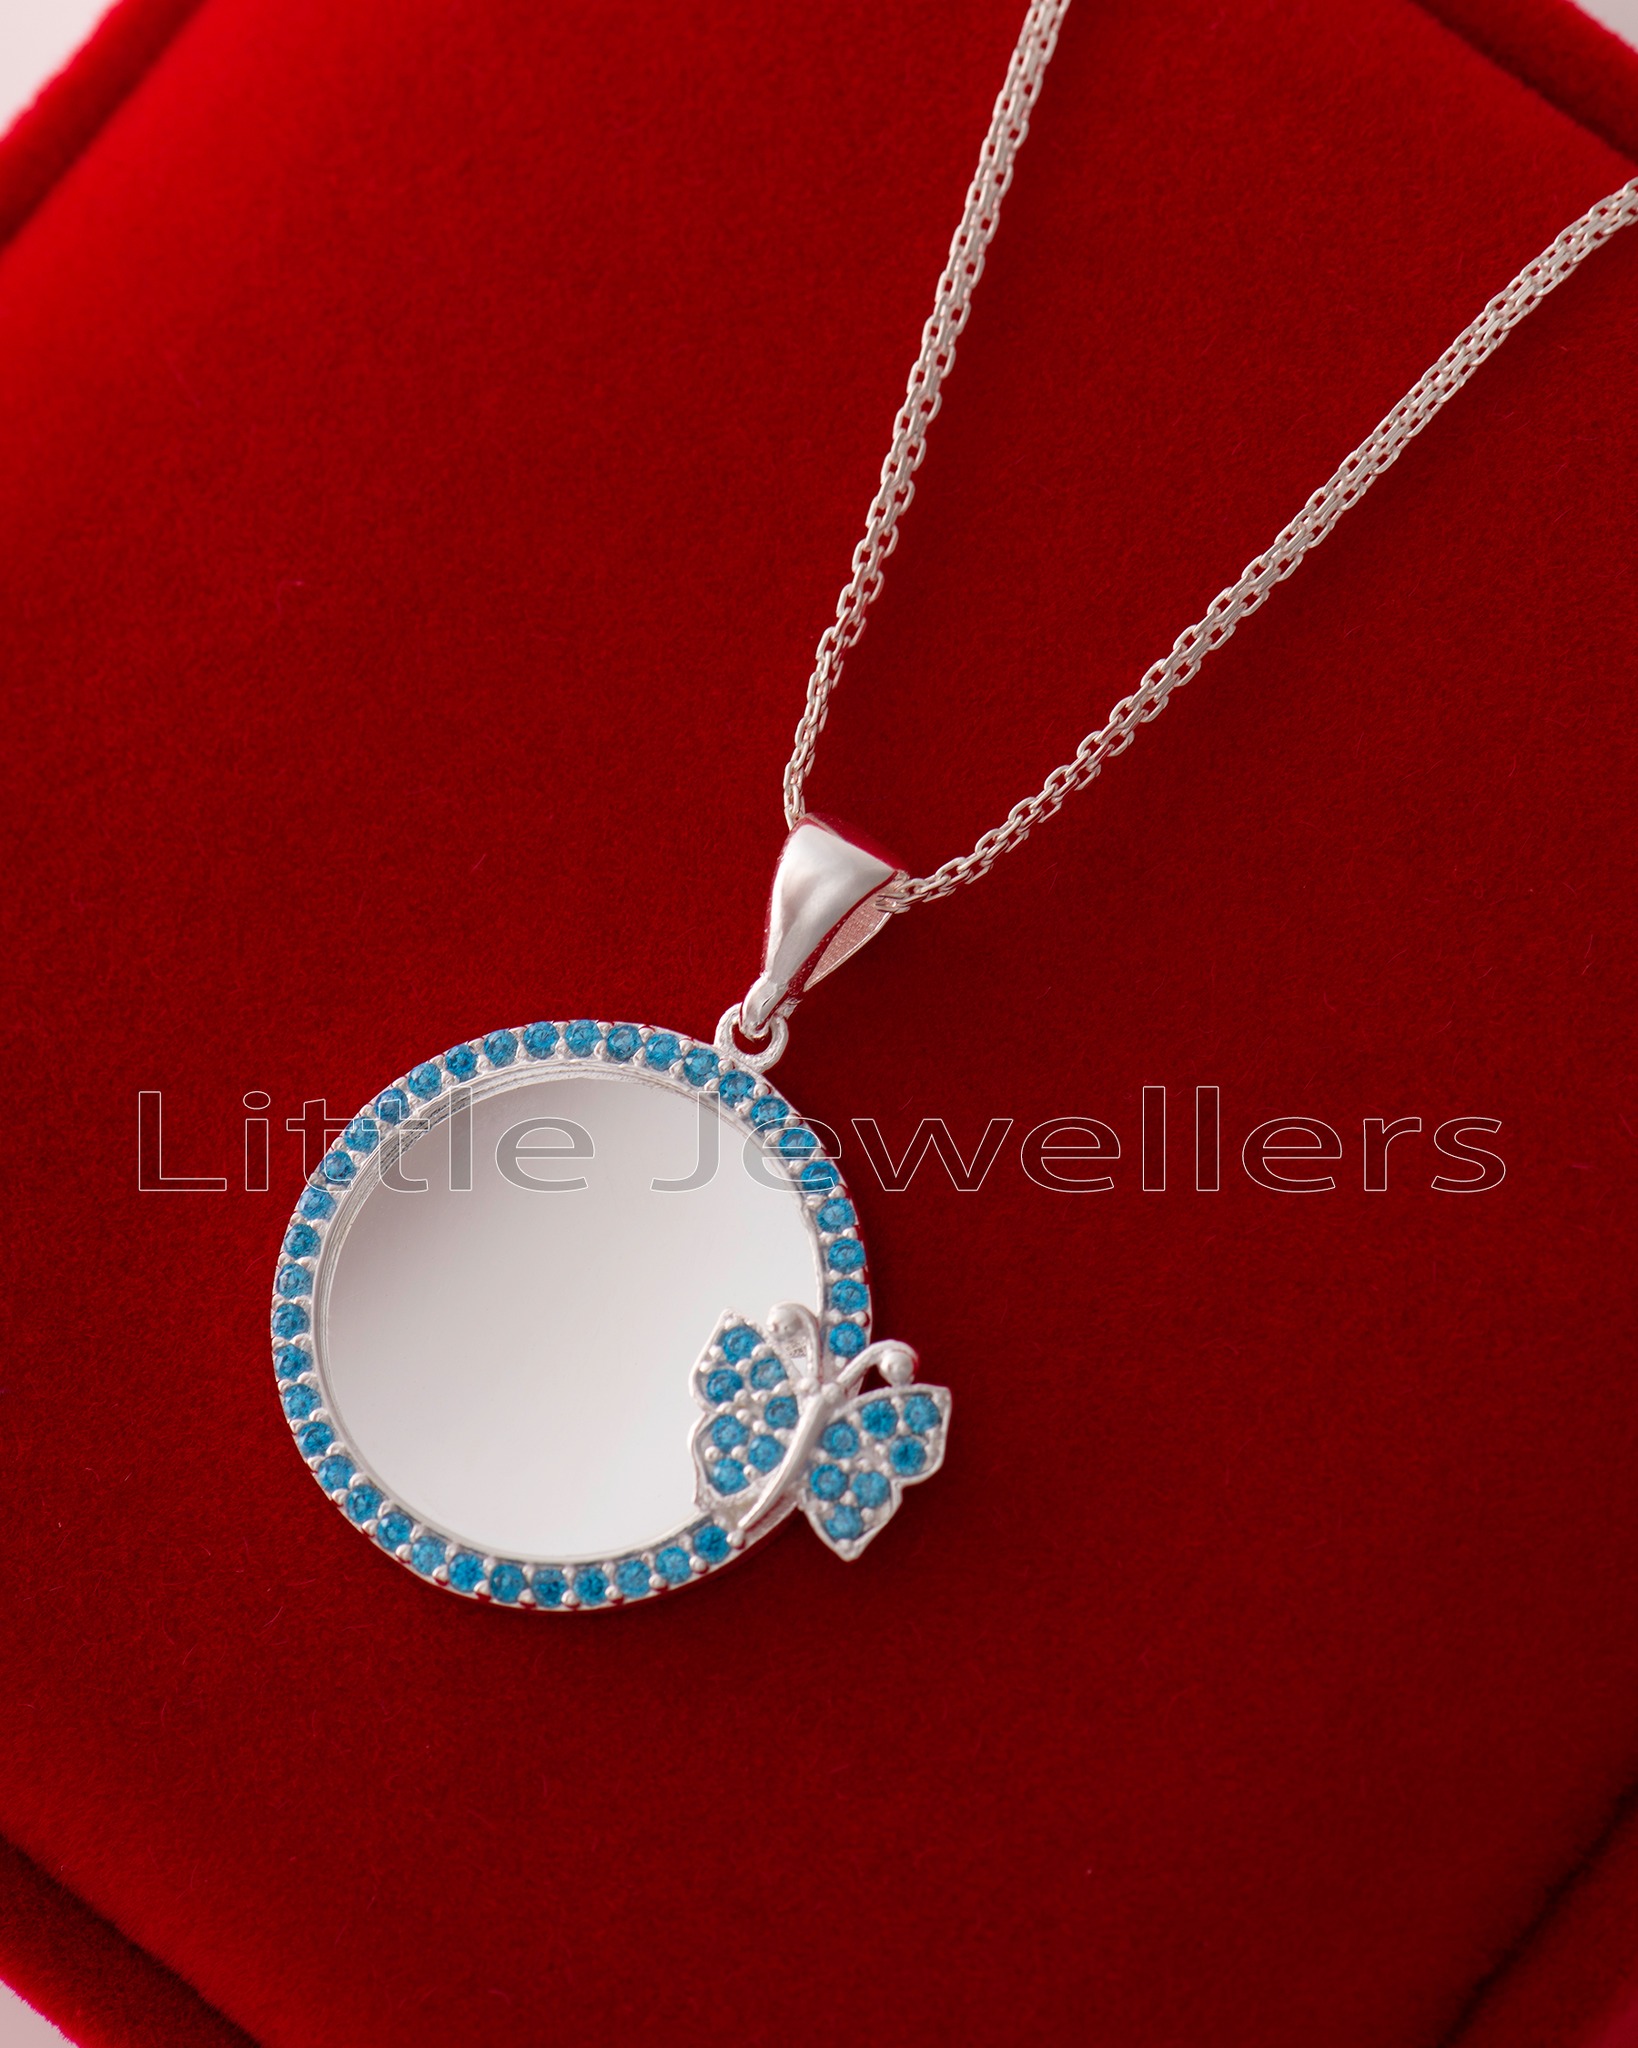 Shop for unique butterfly jewelry crafted from sterling silver and aquamarine zirconia stones. Get creative & make it extra special with personalized inscriptions. Find the perfect jewelry in Nairobi.